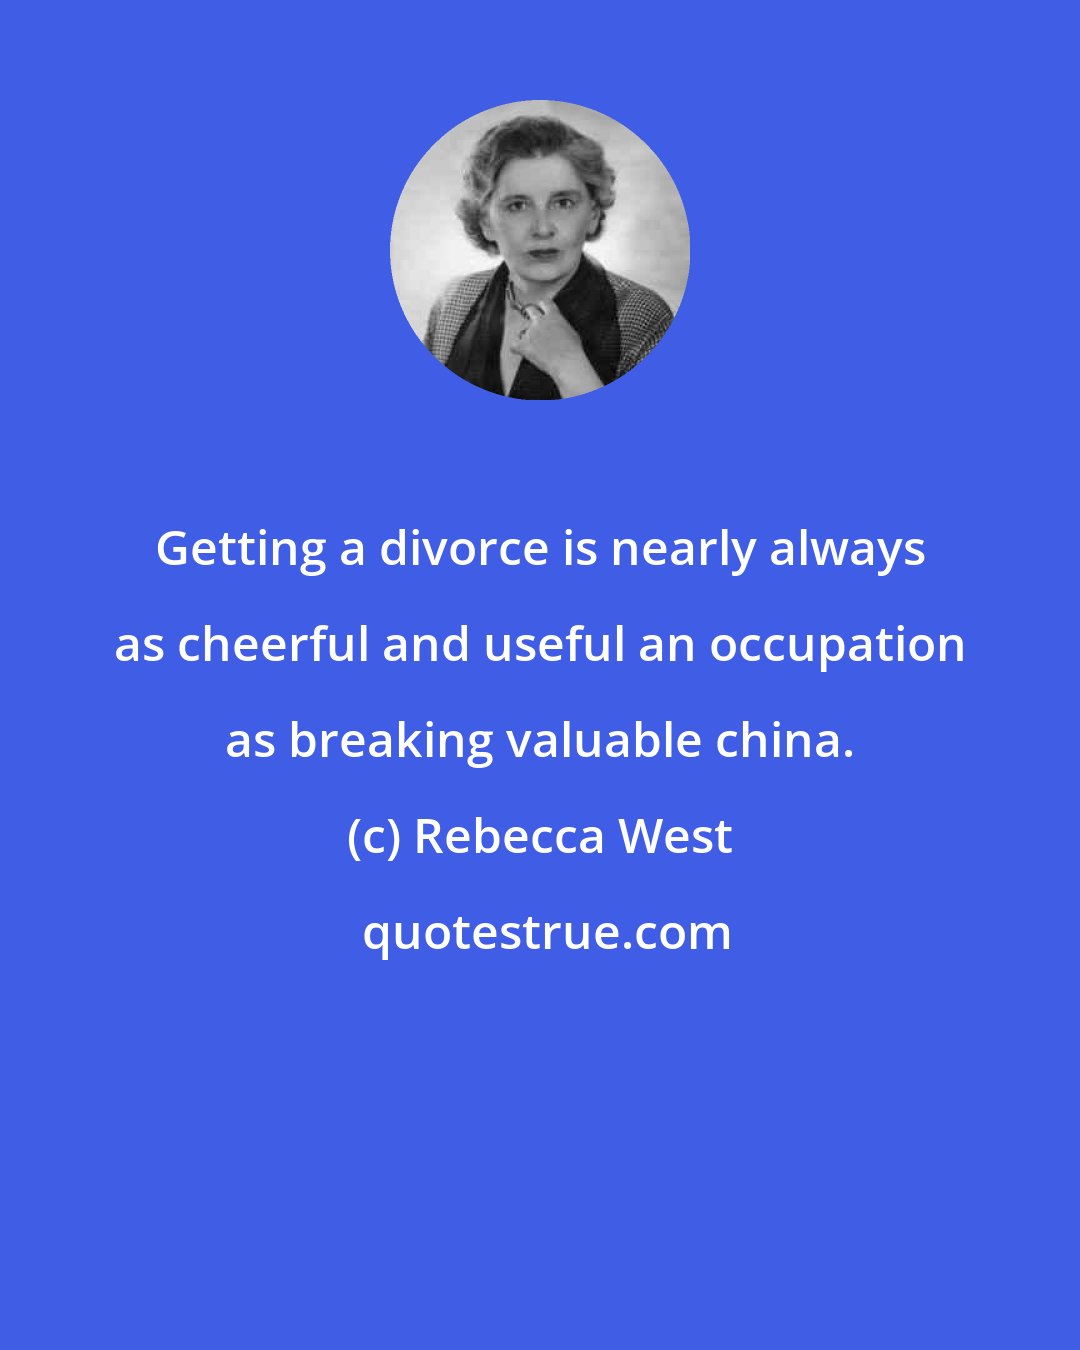 Rebecca West: Getting a divorce is nearly always as cheerful and useful an occupation as breaking valuable china.